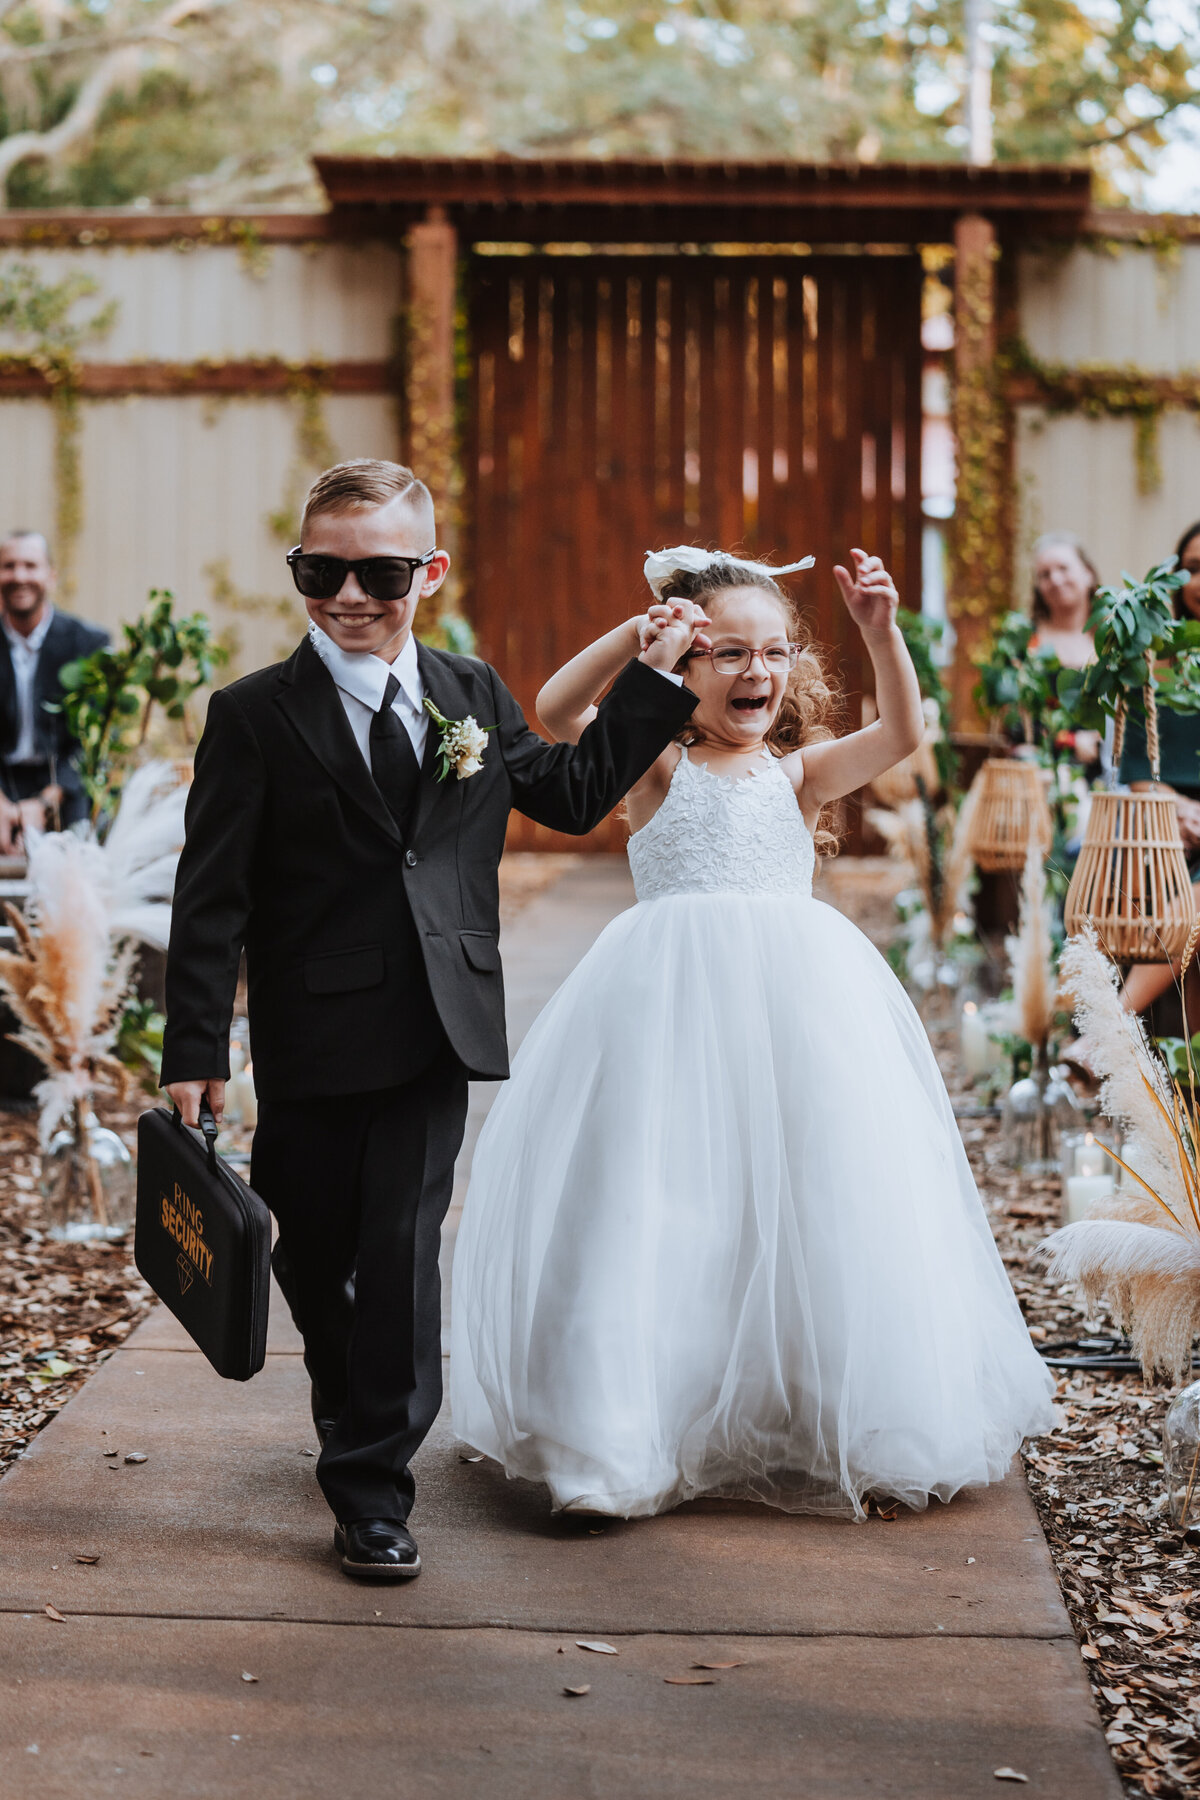 flower girl and ring bearer walking down aisle together smiling and laughing